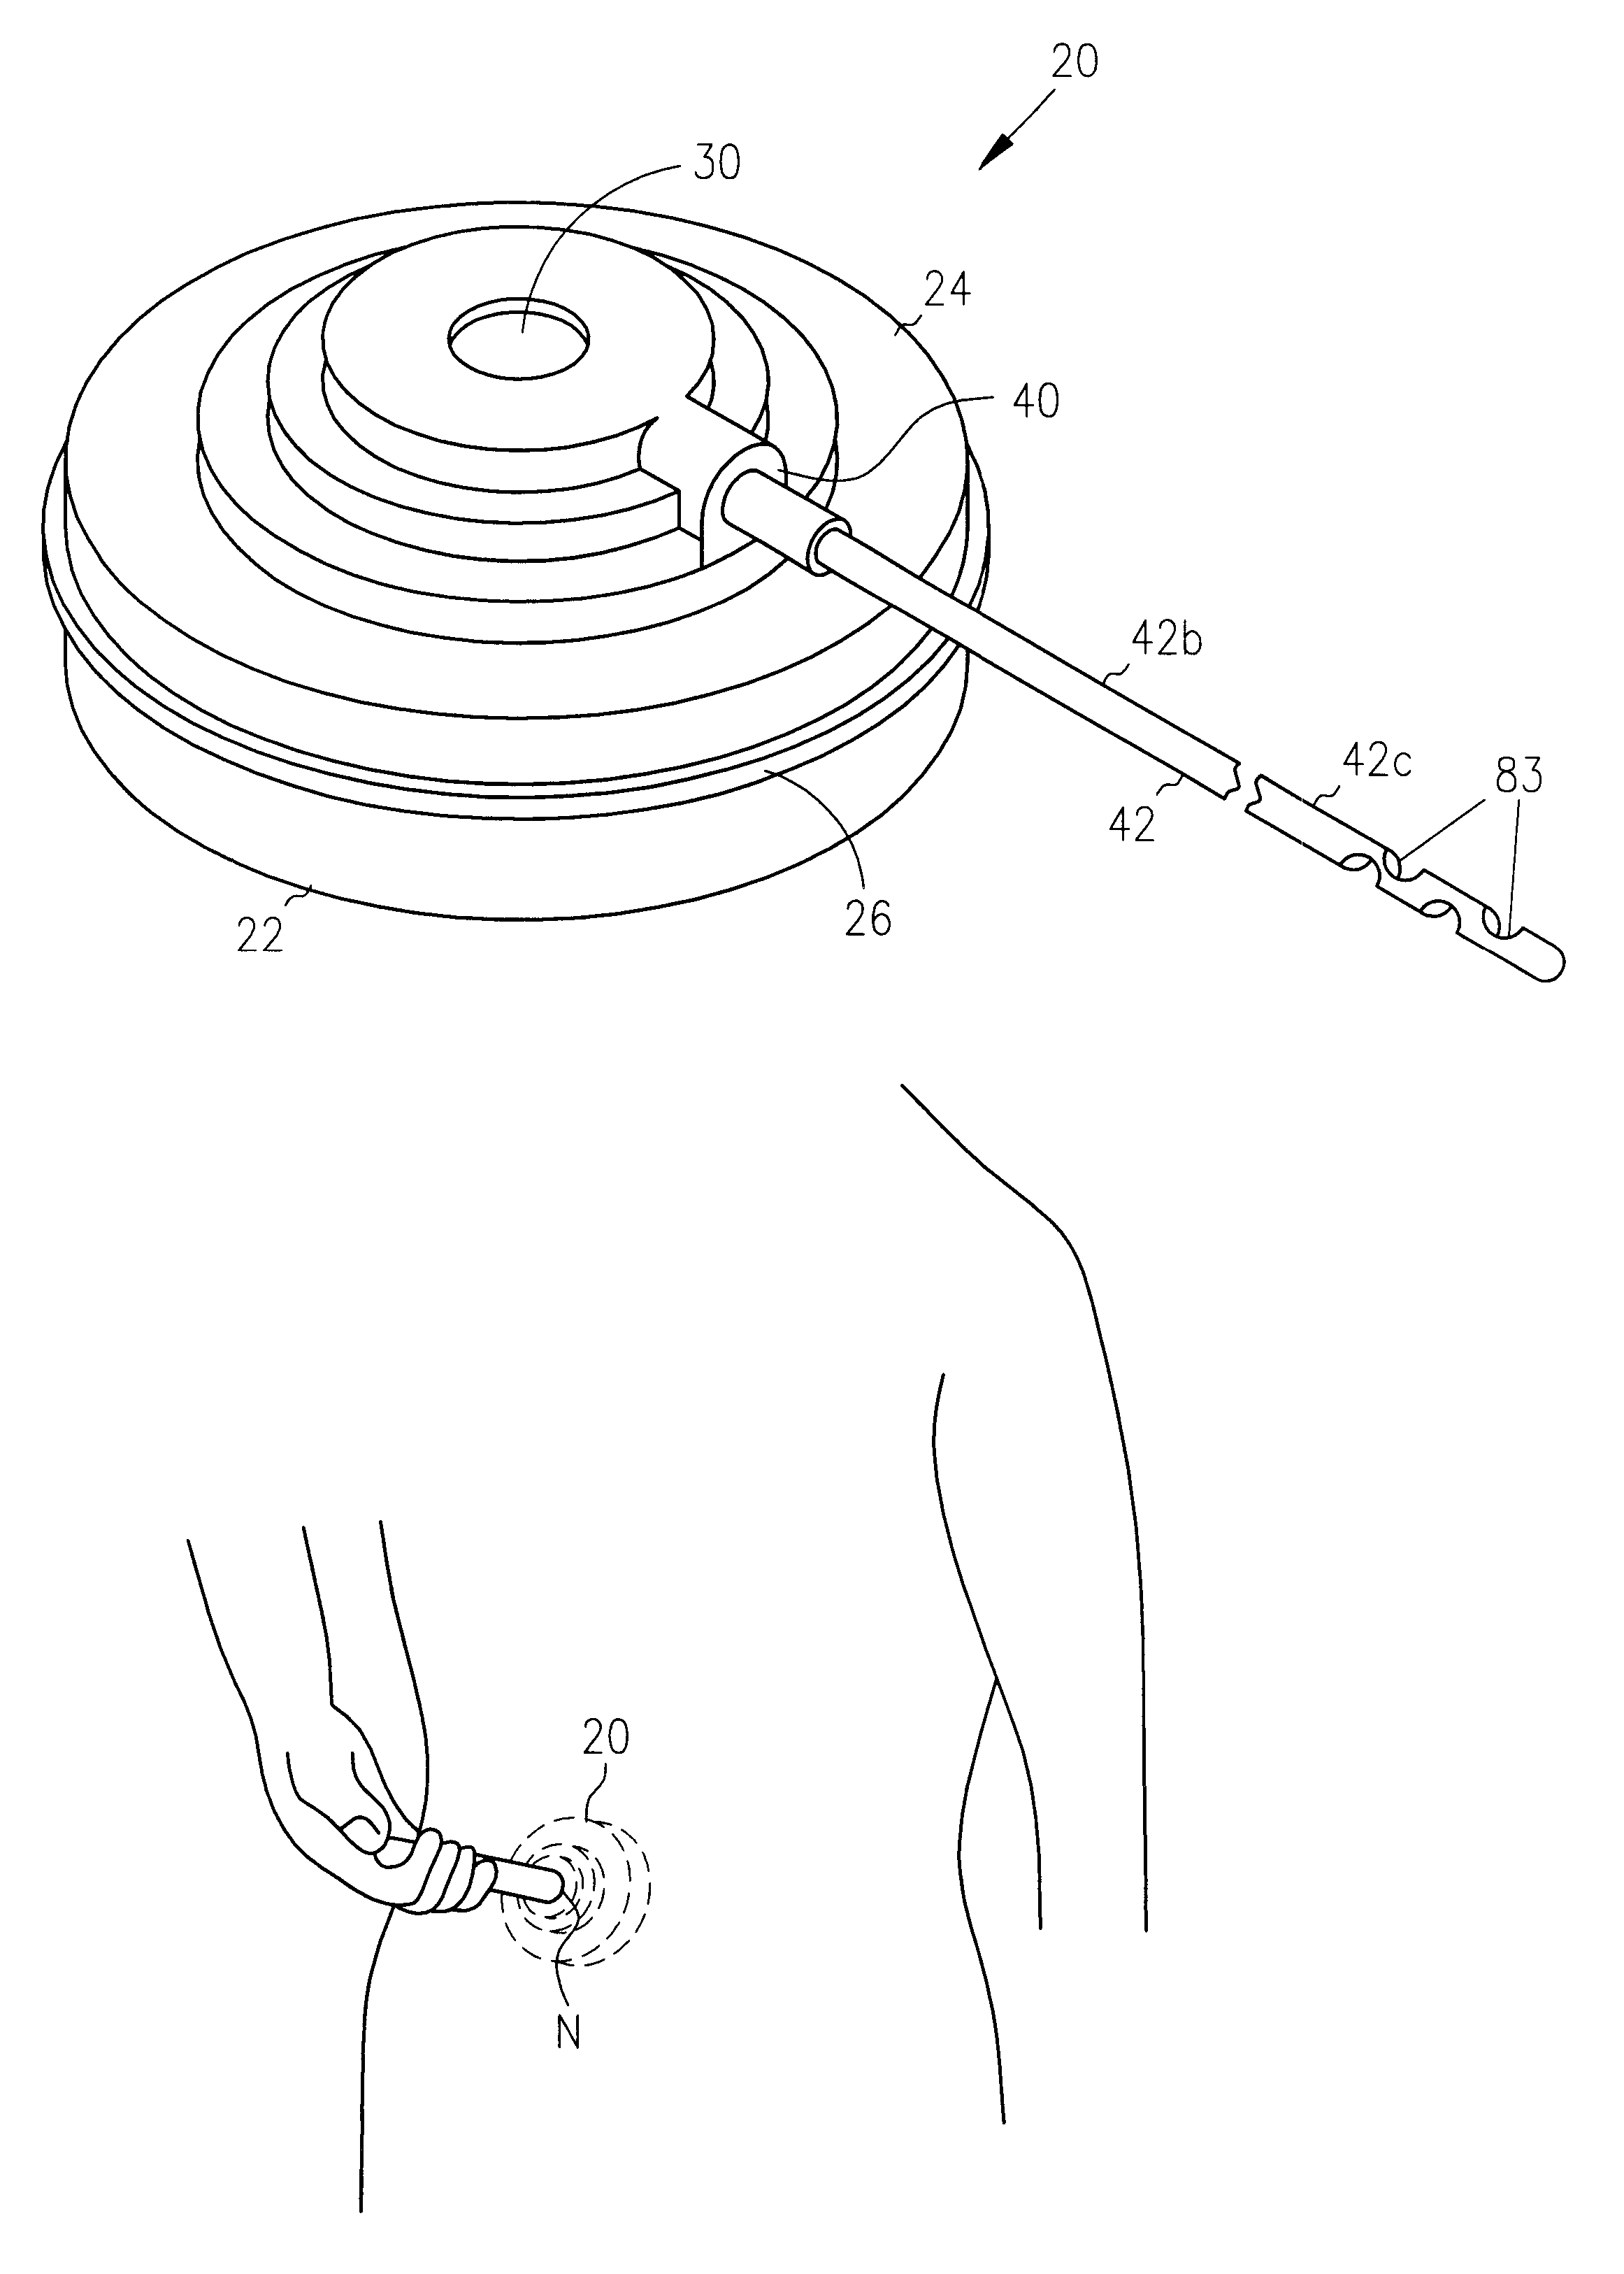 Fluid delivery device with heat activated energy source